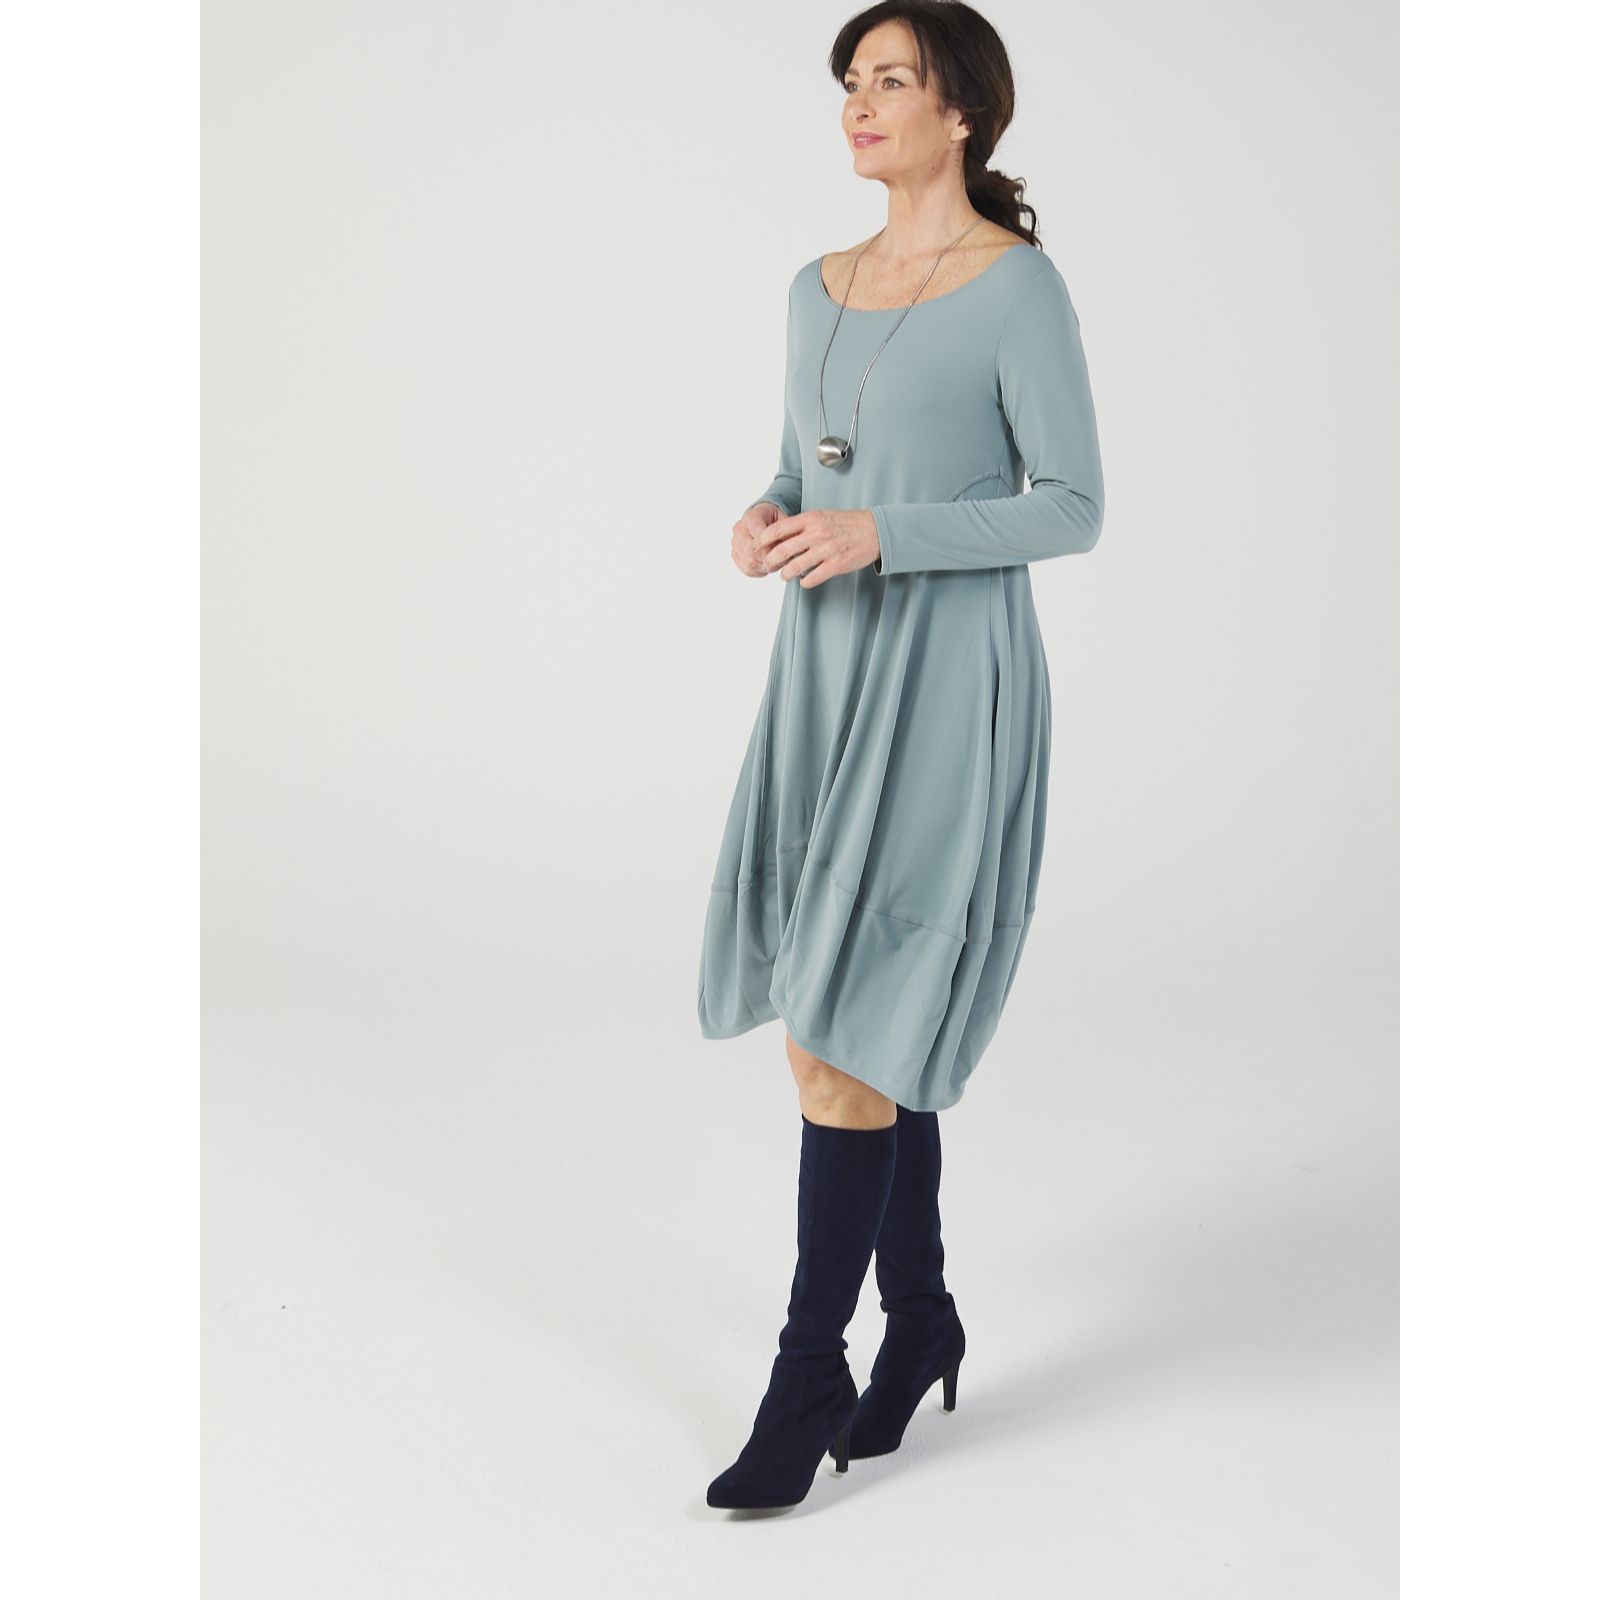 mature womens clothing online